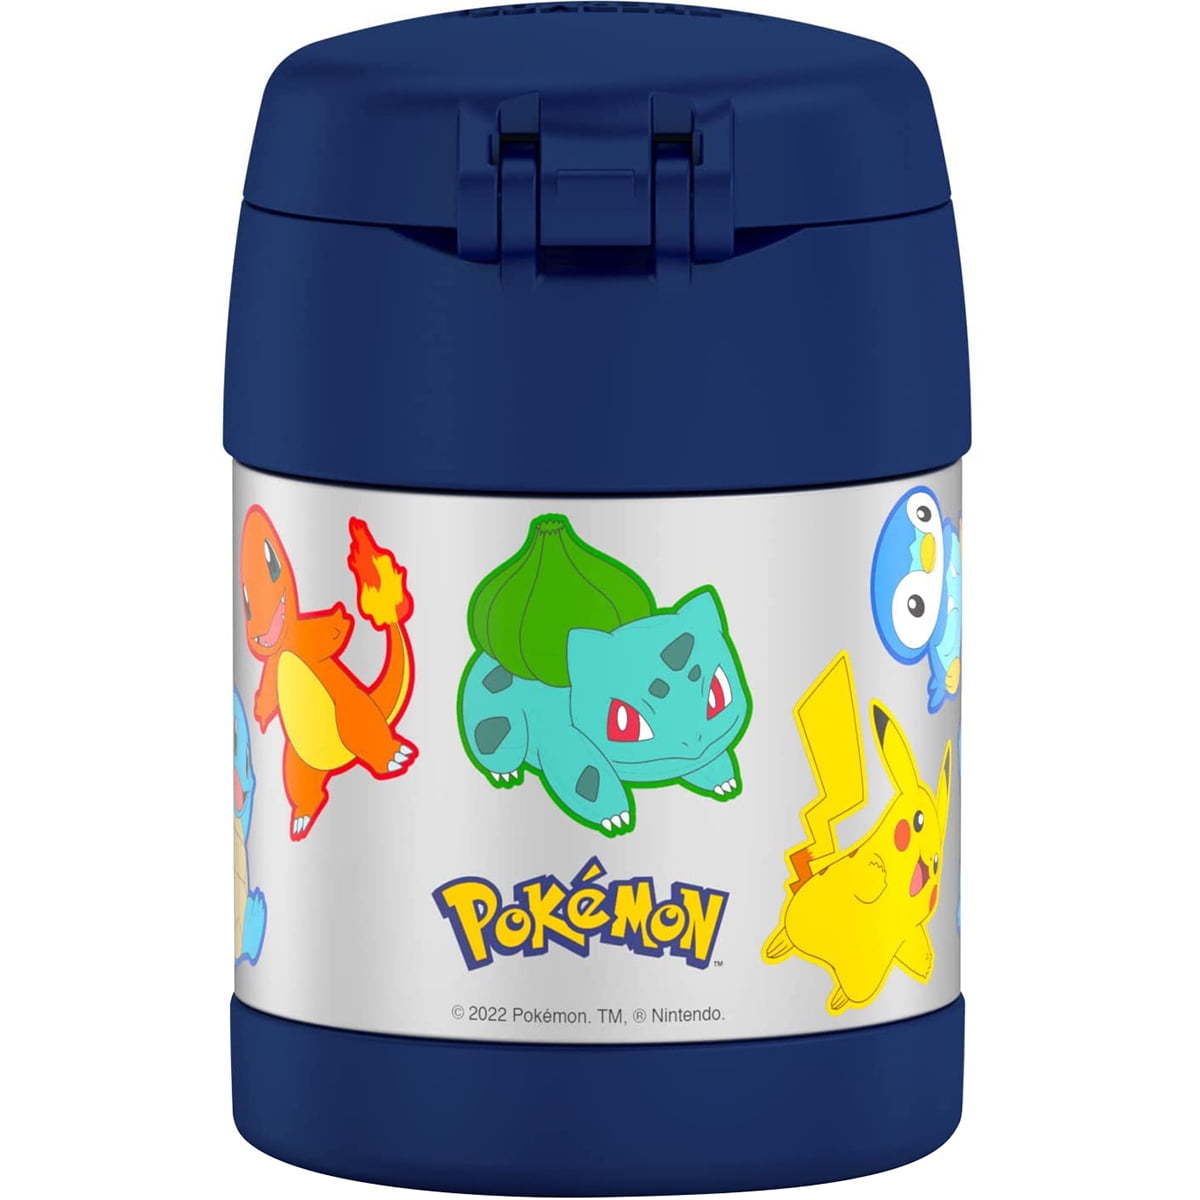 Pokemon Storage & Containers for Kids